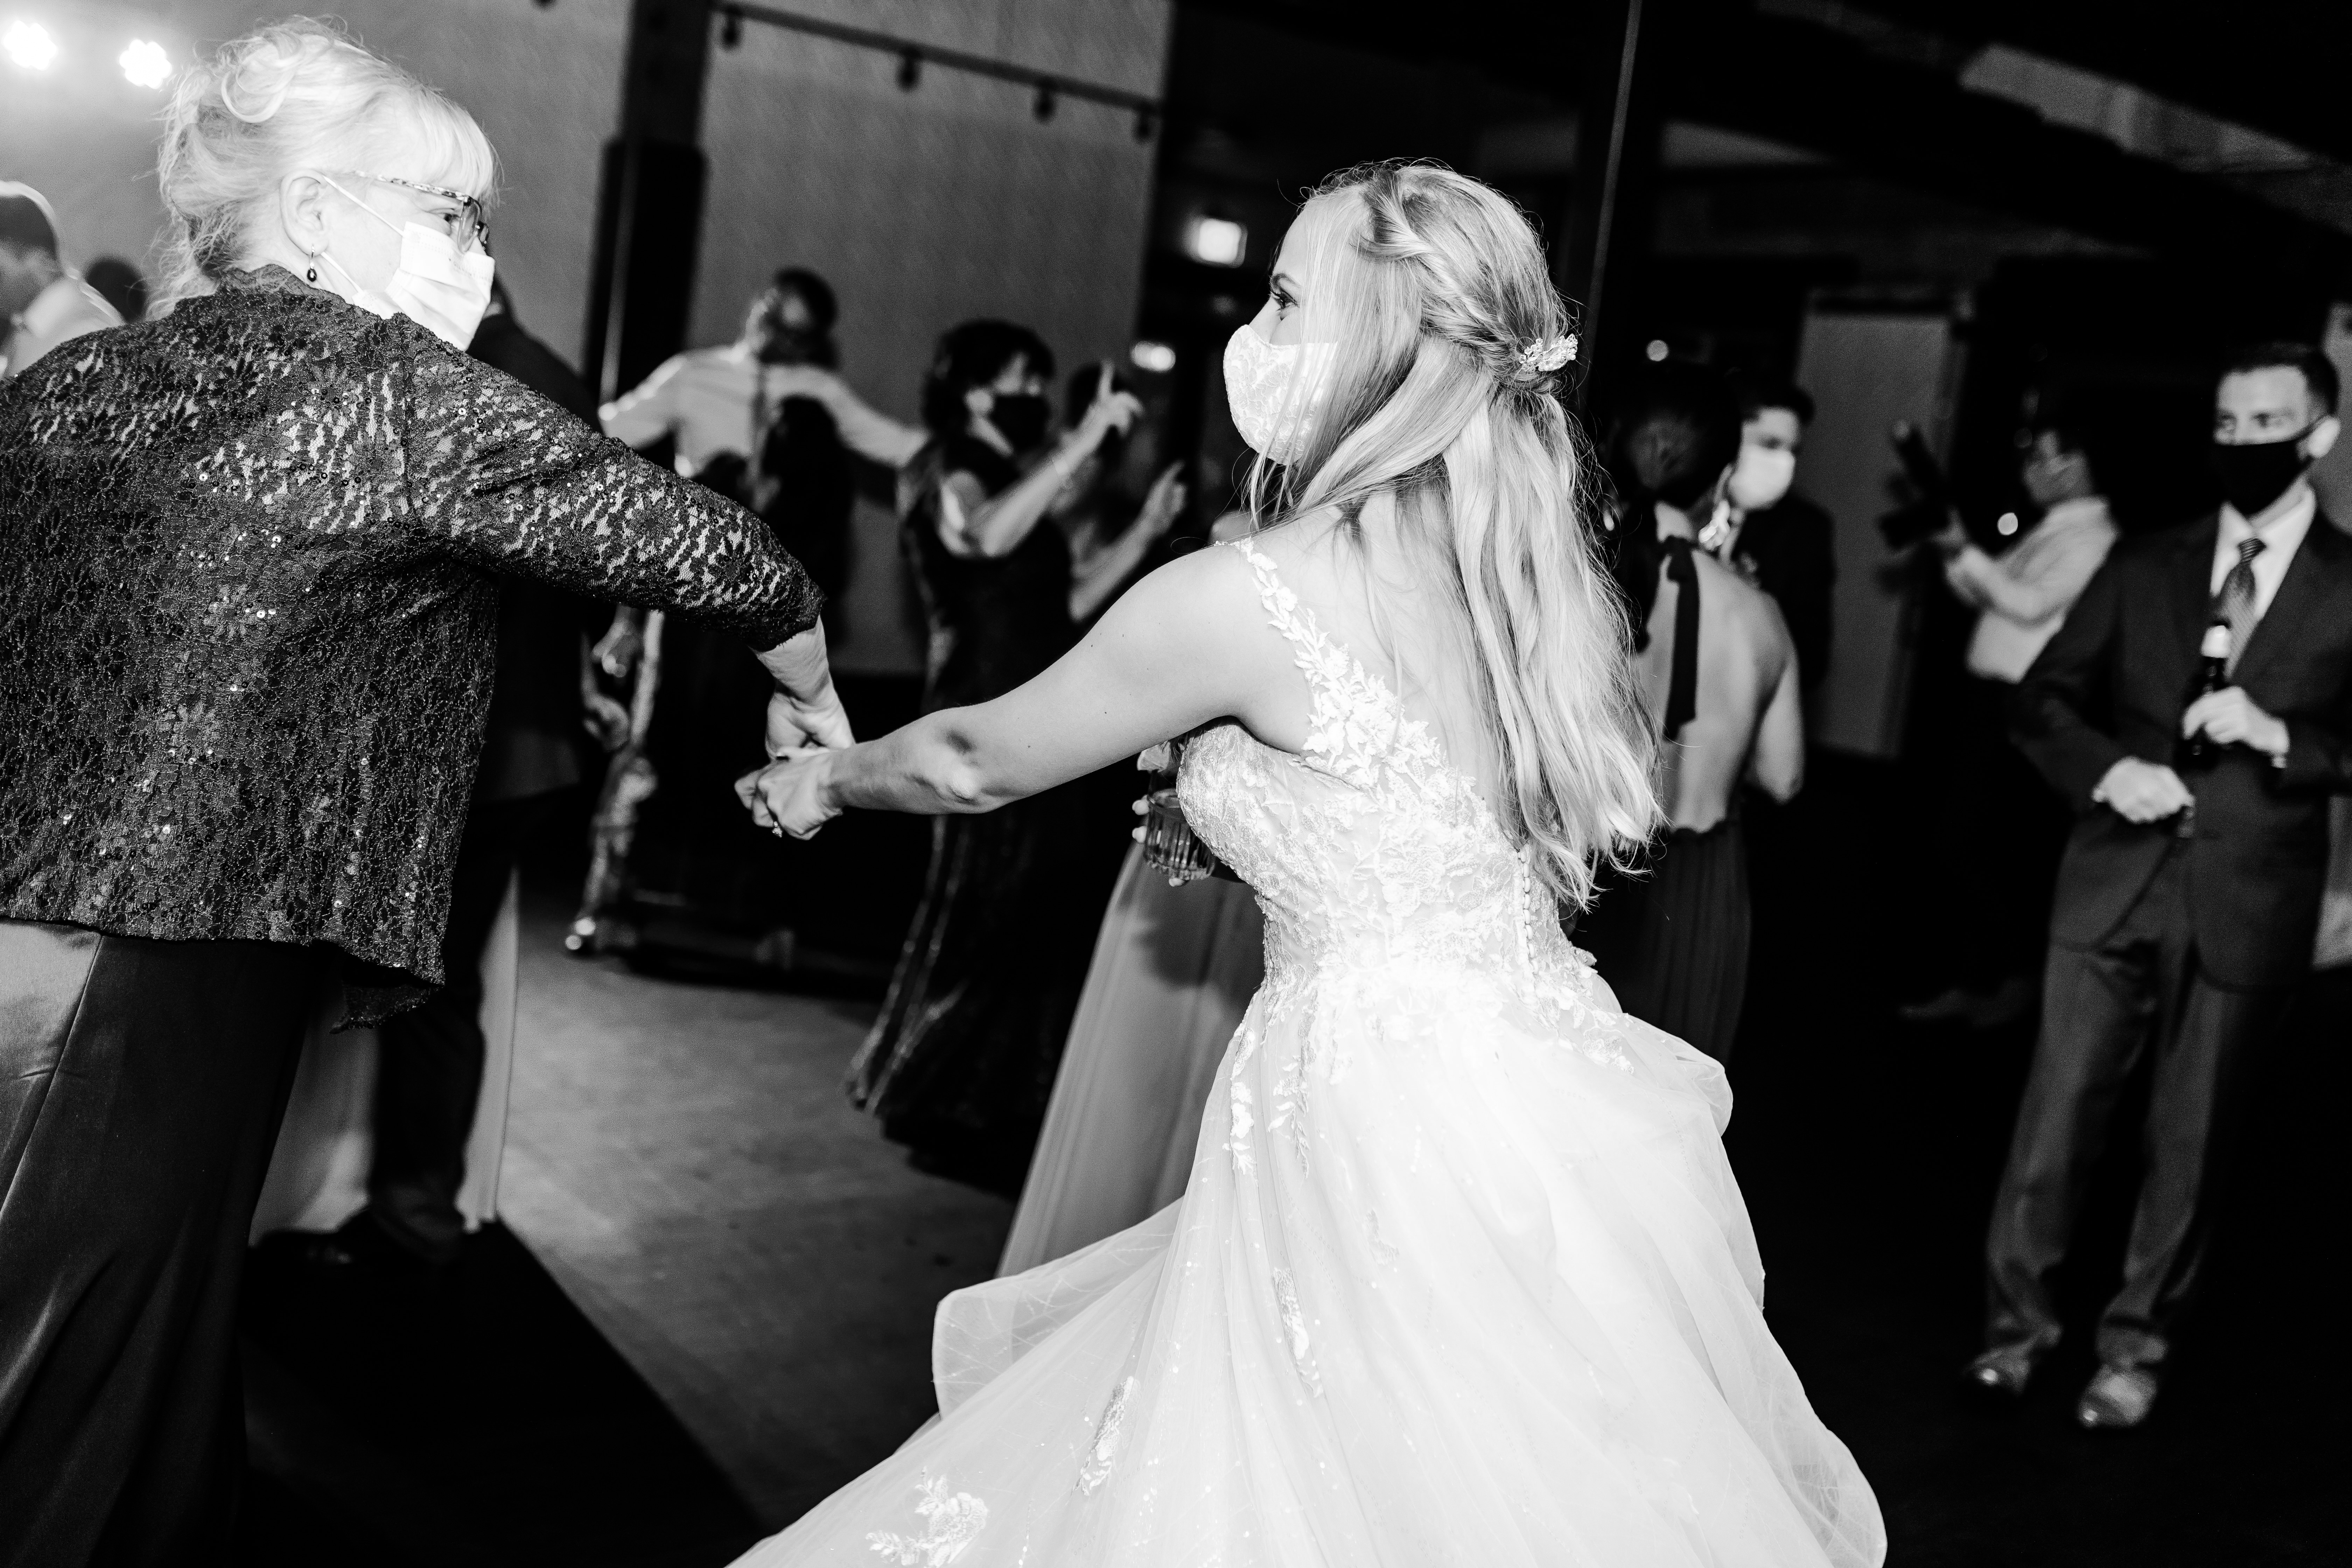 Bride dancing with mom on dance floor at intimate wedding